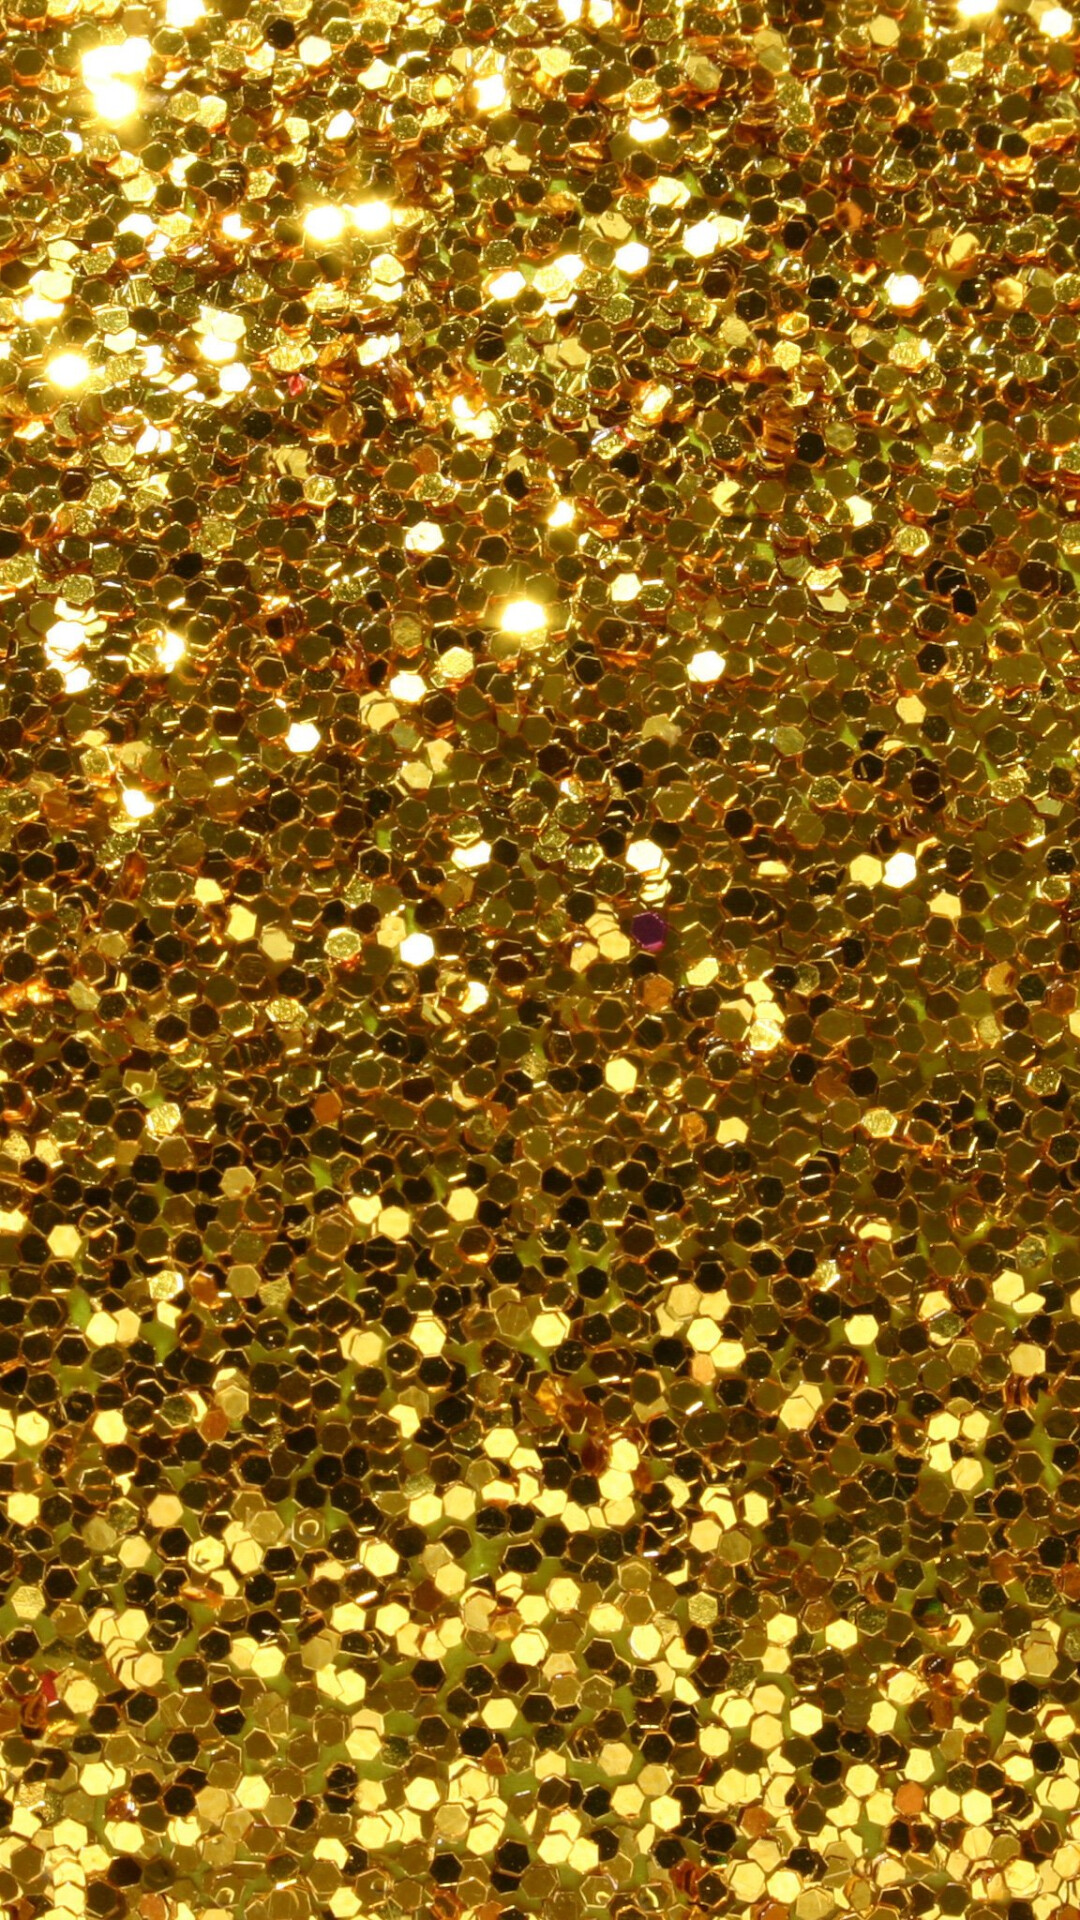 Gold Glitter: A scaly golden sheet used for decoration purposes, Precious appearance. 1080x1920 Full HD Wallpaper.